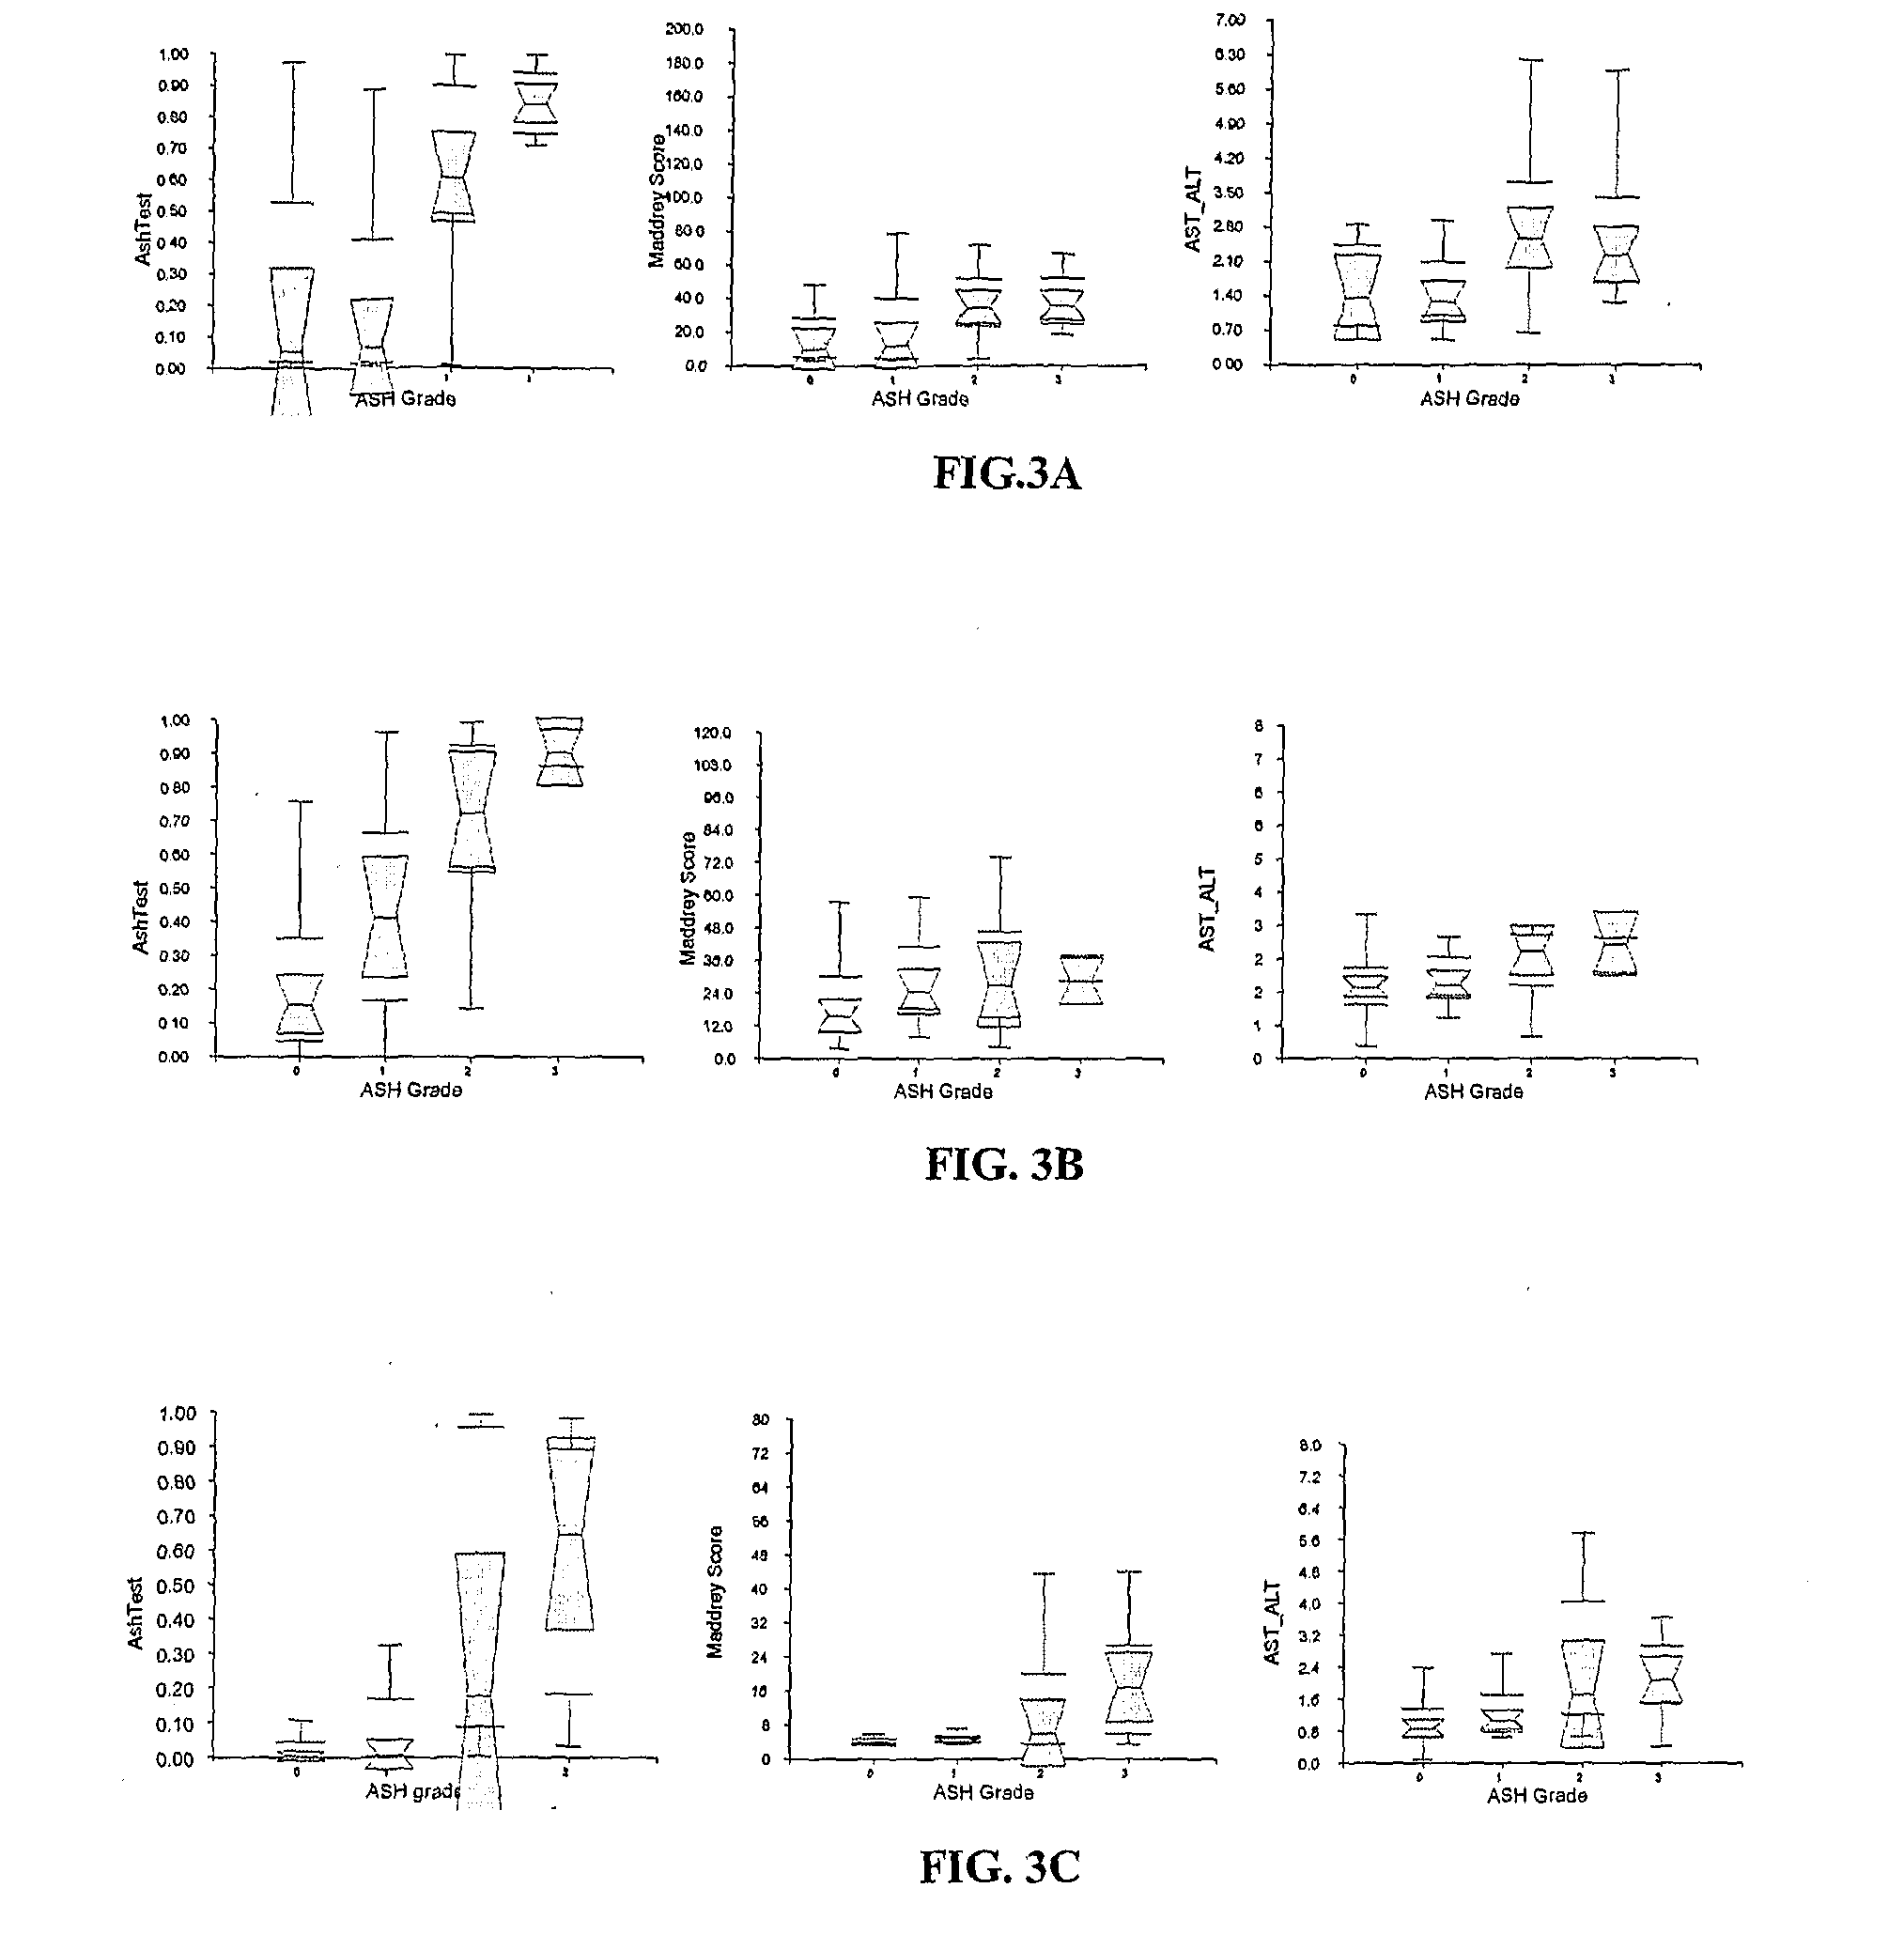 Diagnosis Method Of Alcoholic Or Non-Alcoholic Steato-Hepatitis Using Biochemical Markers